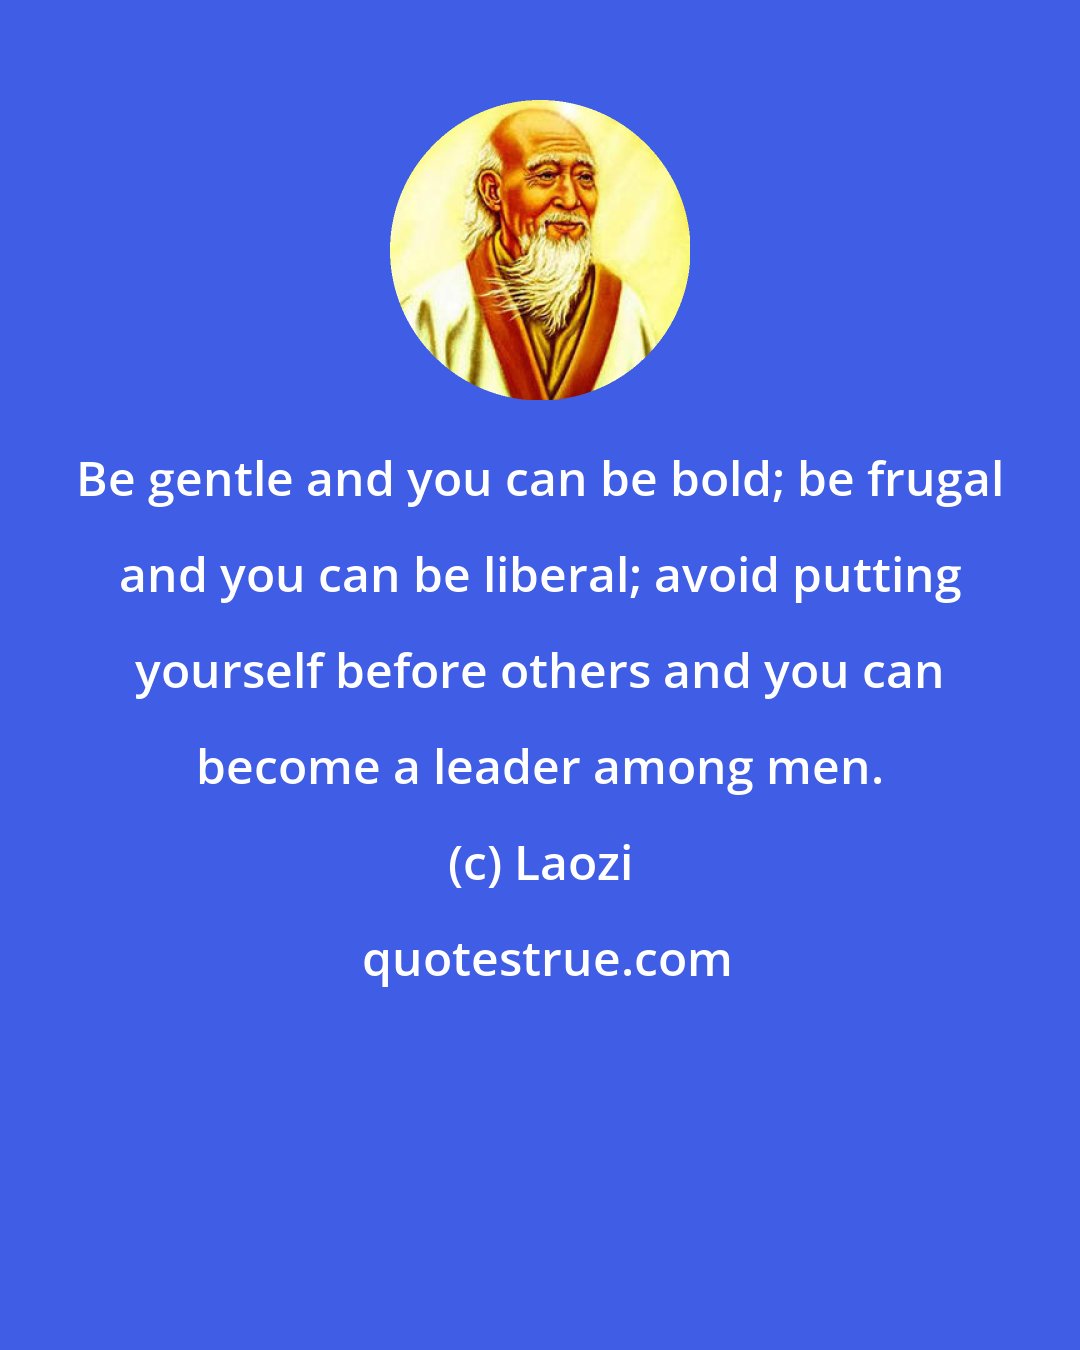 Laozi: Be gentle and you can be bold; be frugal and you can be liberal; avoid putting yourself before others and you can become a leader among men.